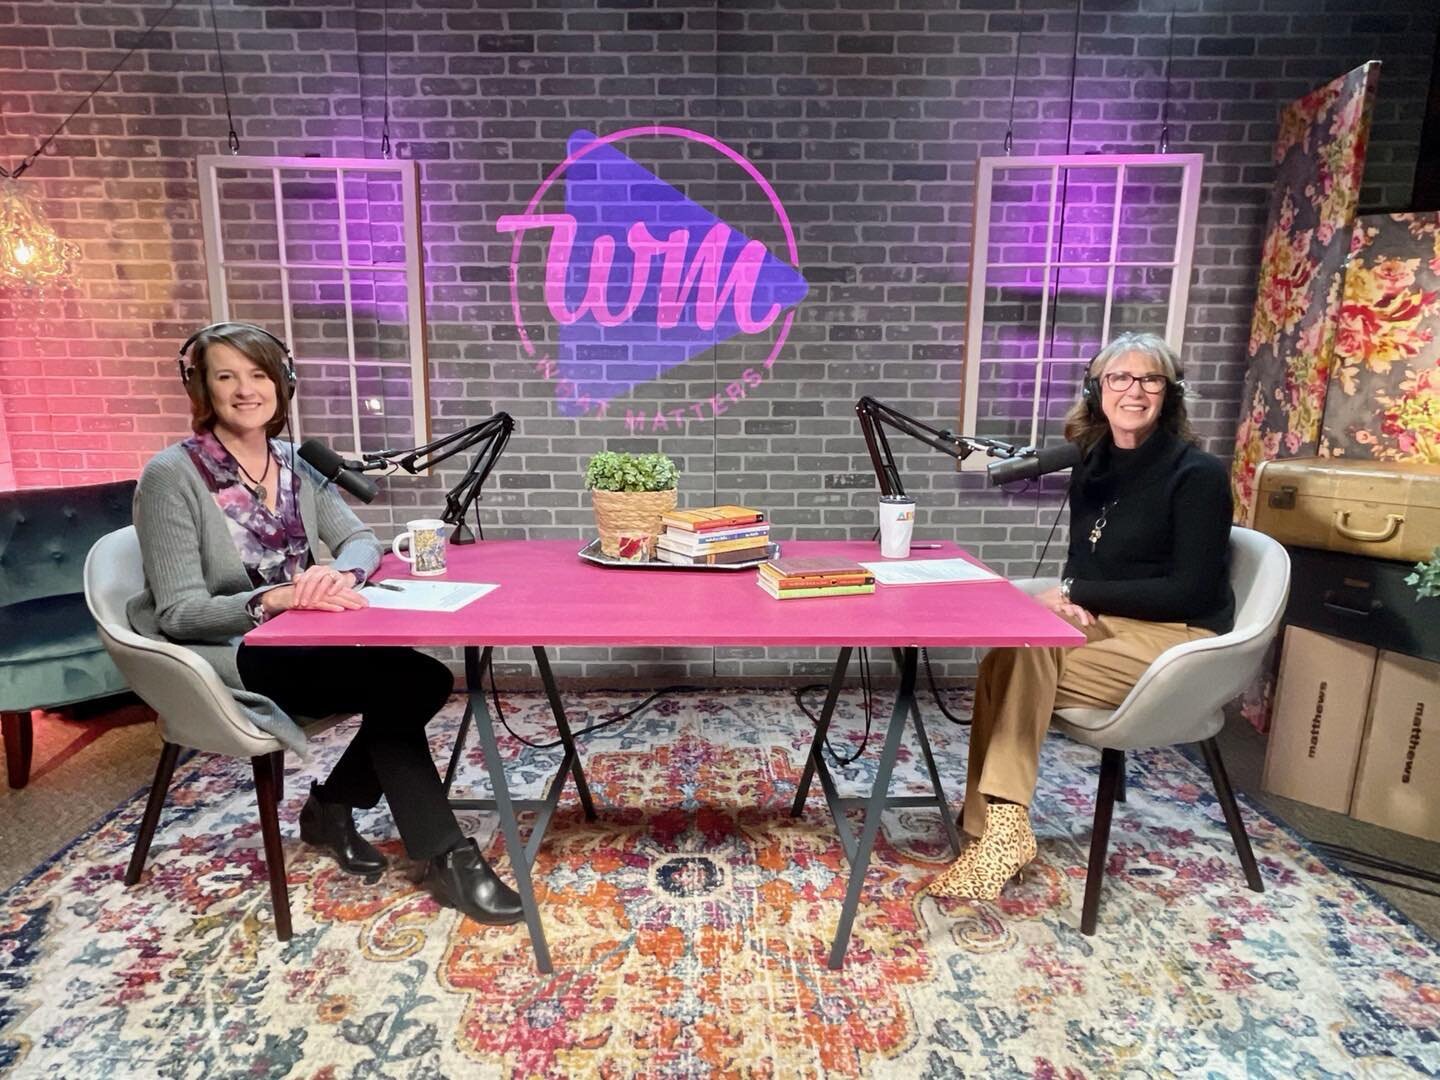 So this fun thing happened!  Thanks to Michelle Funk and Lane Goodin for such a warm welcome and the opportunity to share about the Enneagram on the What Matters Podcast!  You can check it out on YouTube!

https://youtu.be/xZnrHZ9LVm8

#rezwomen #enn